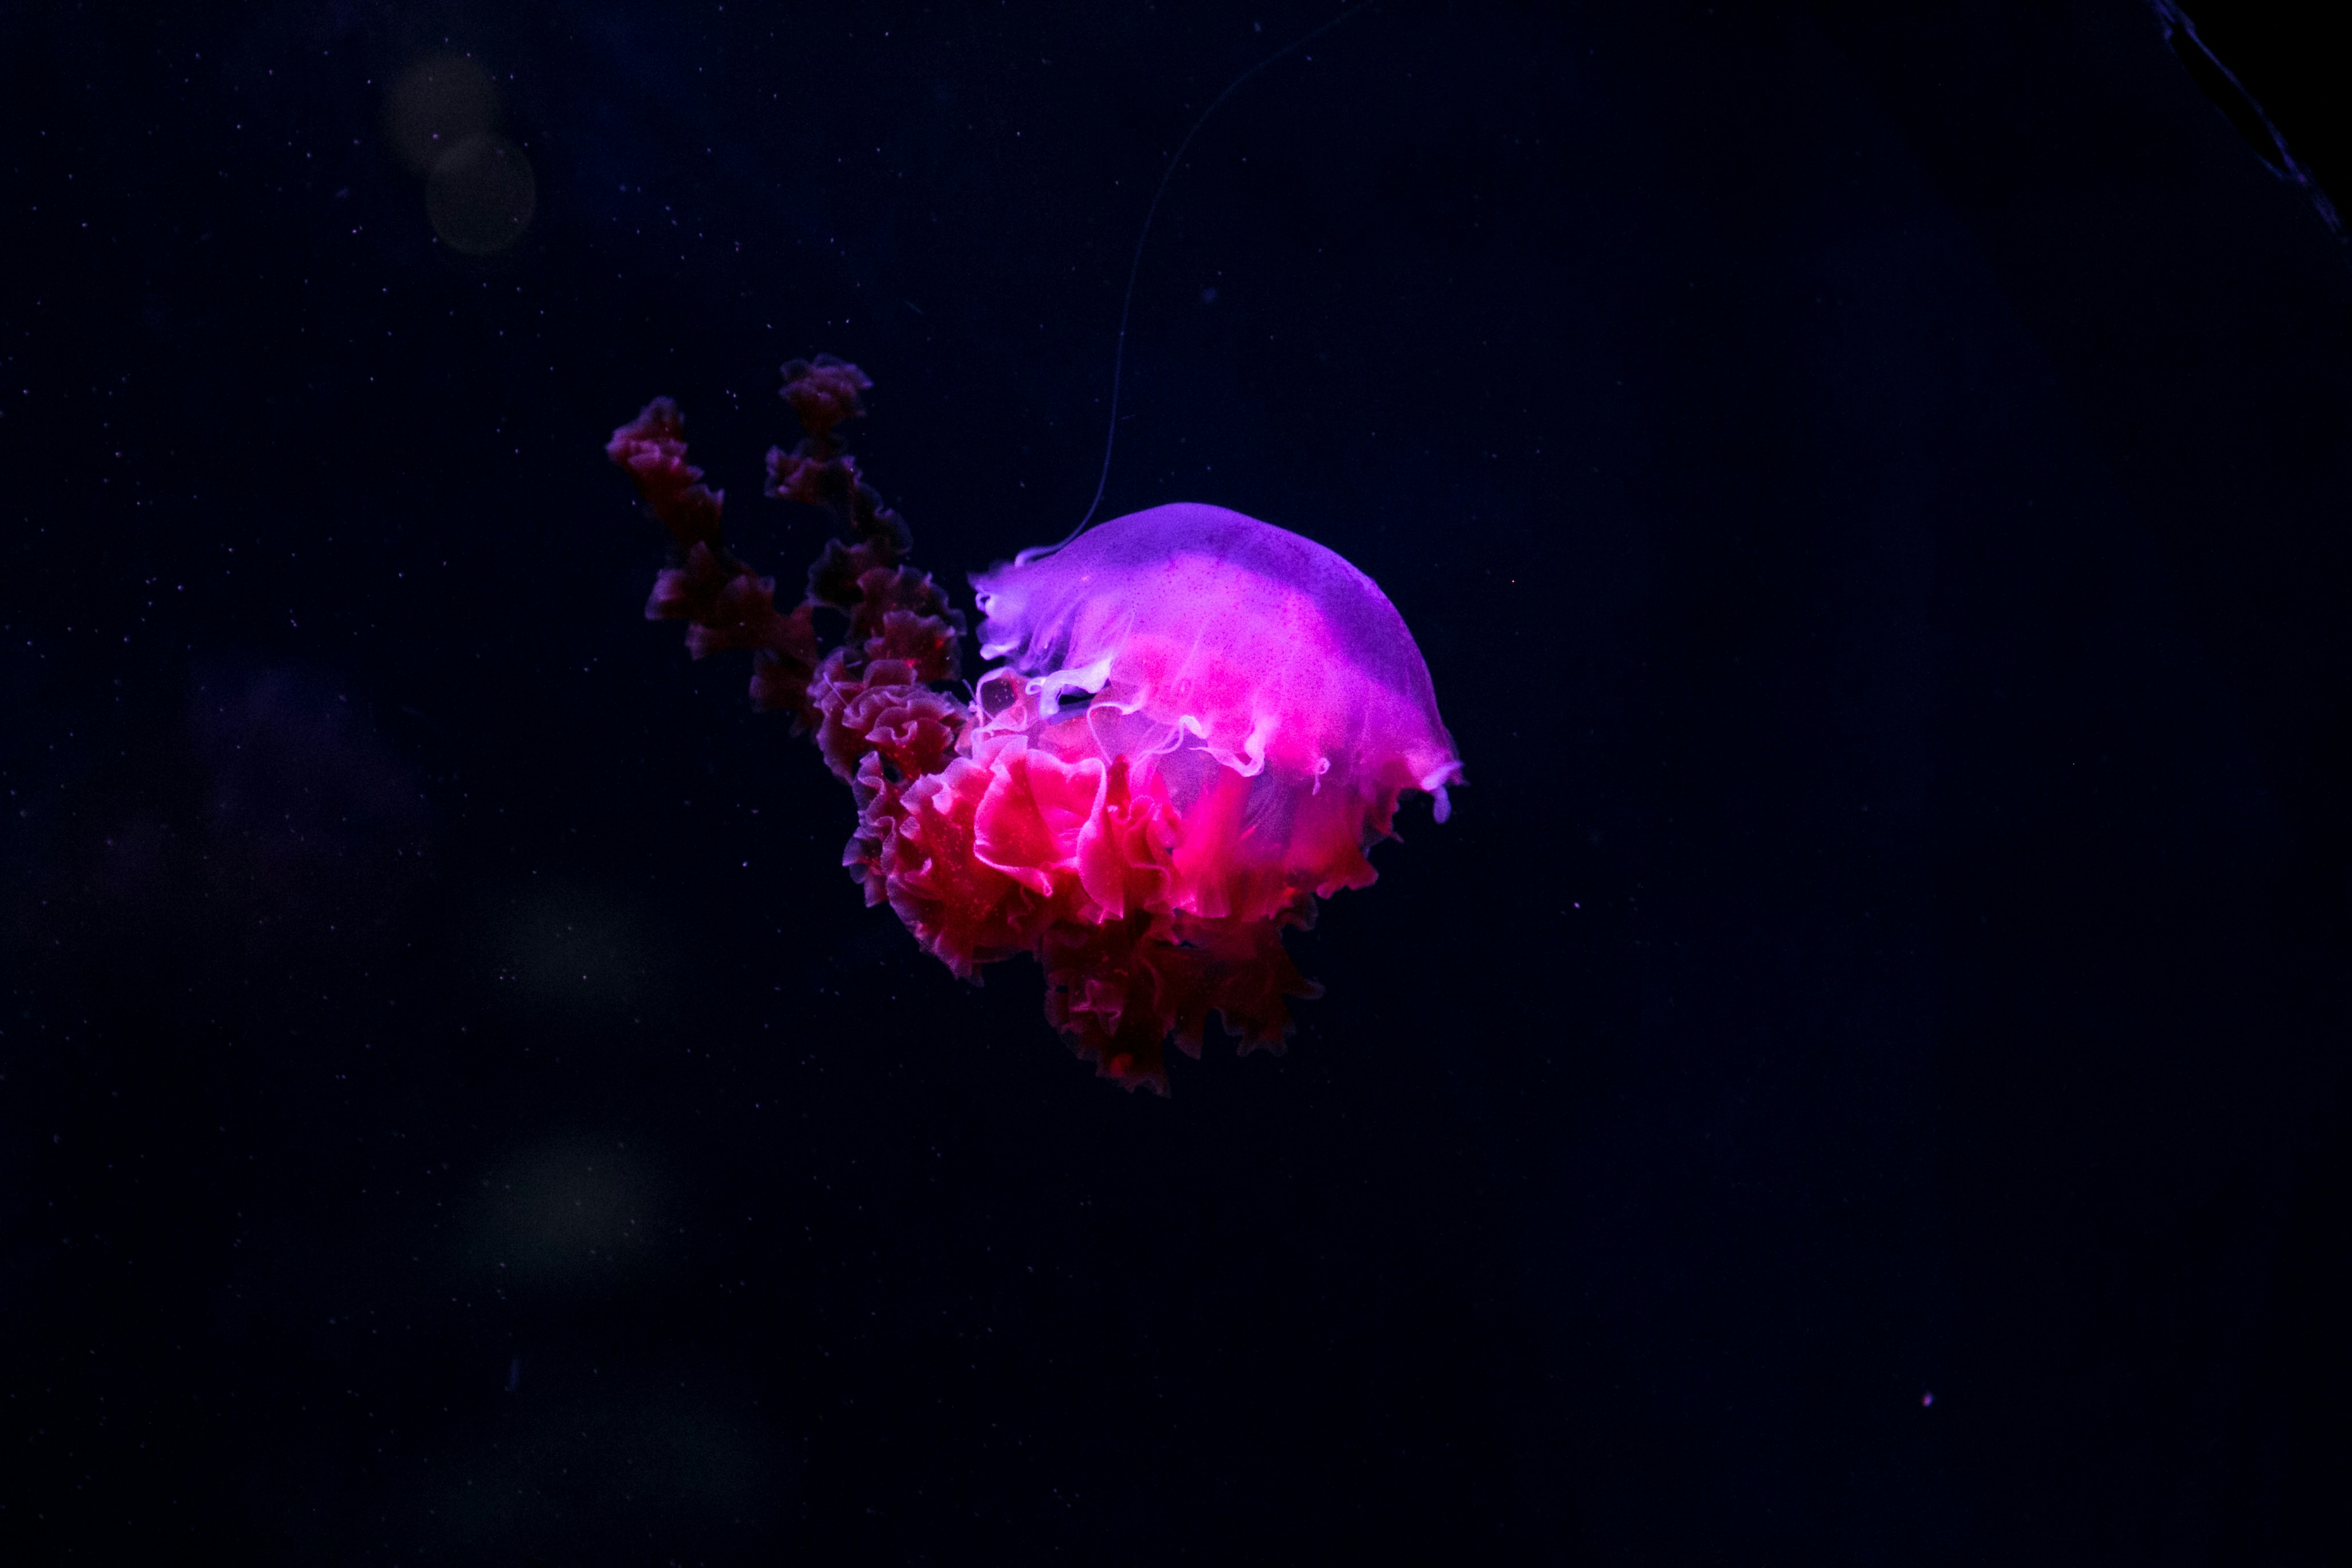 photo of pink and purple jelly fish